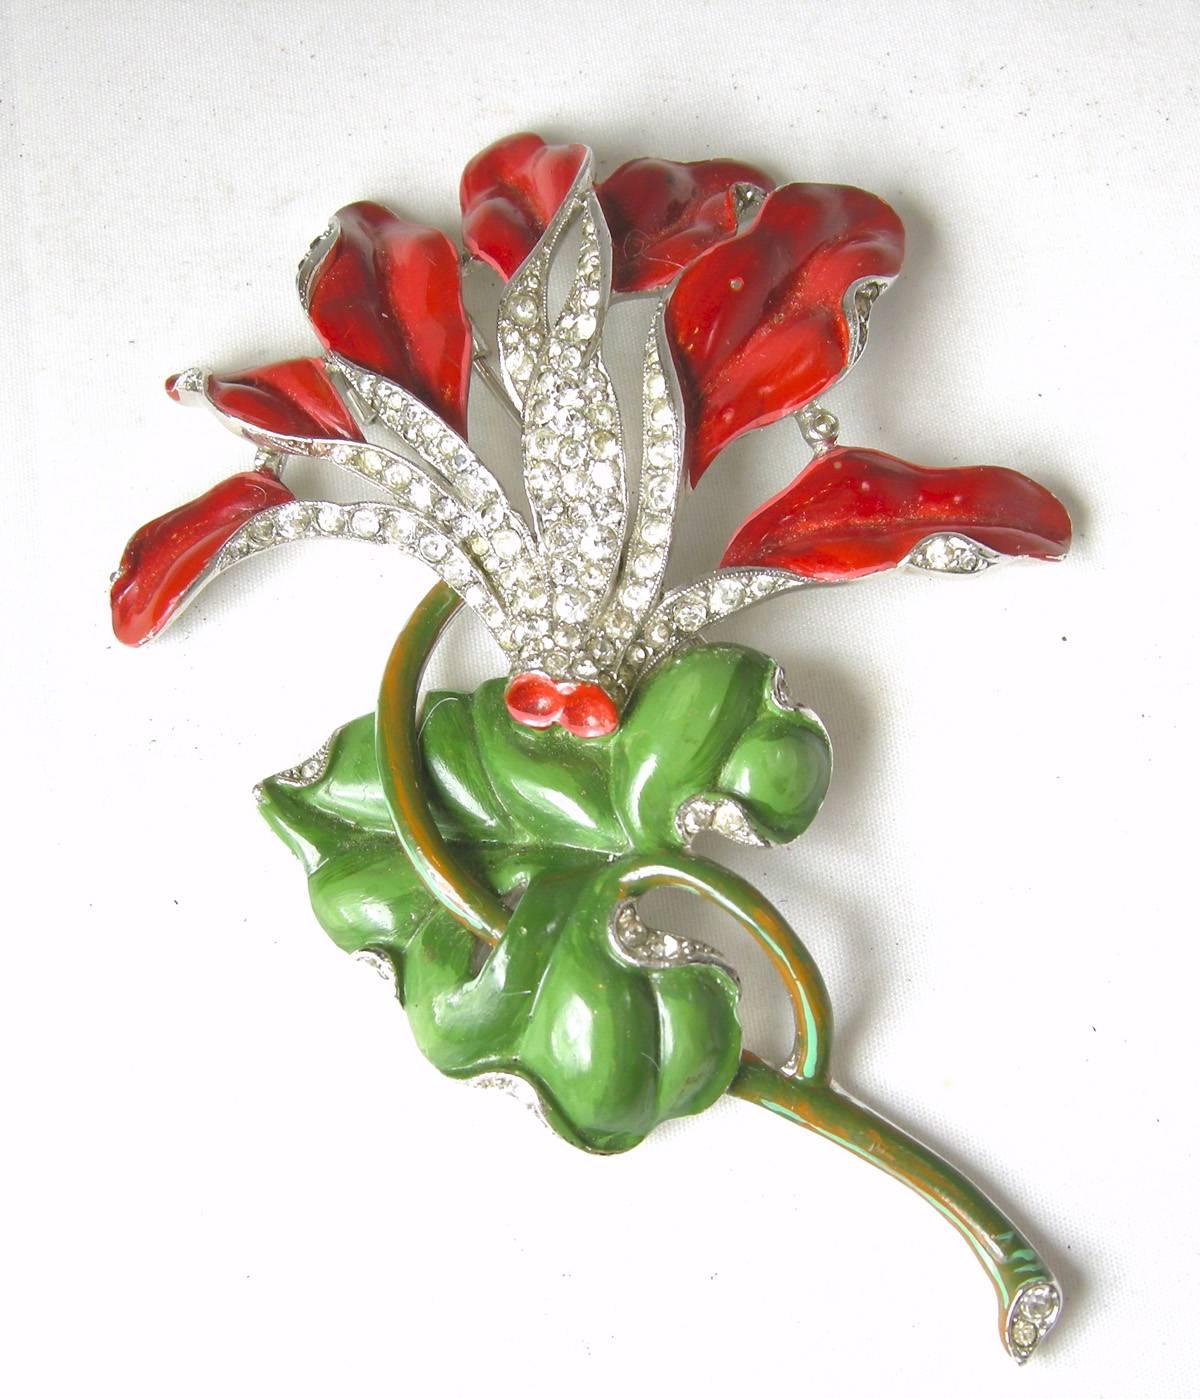 This is one of the rare and famous Trifari flower fur clips that are highly collectable. It features a beautiful green and red enamel carnation with clear diamante rhinestones.  It is set on a rhodium silver finish. It is signed “Trifari” with the